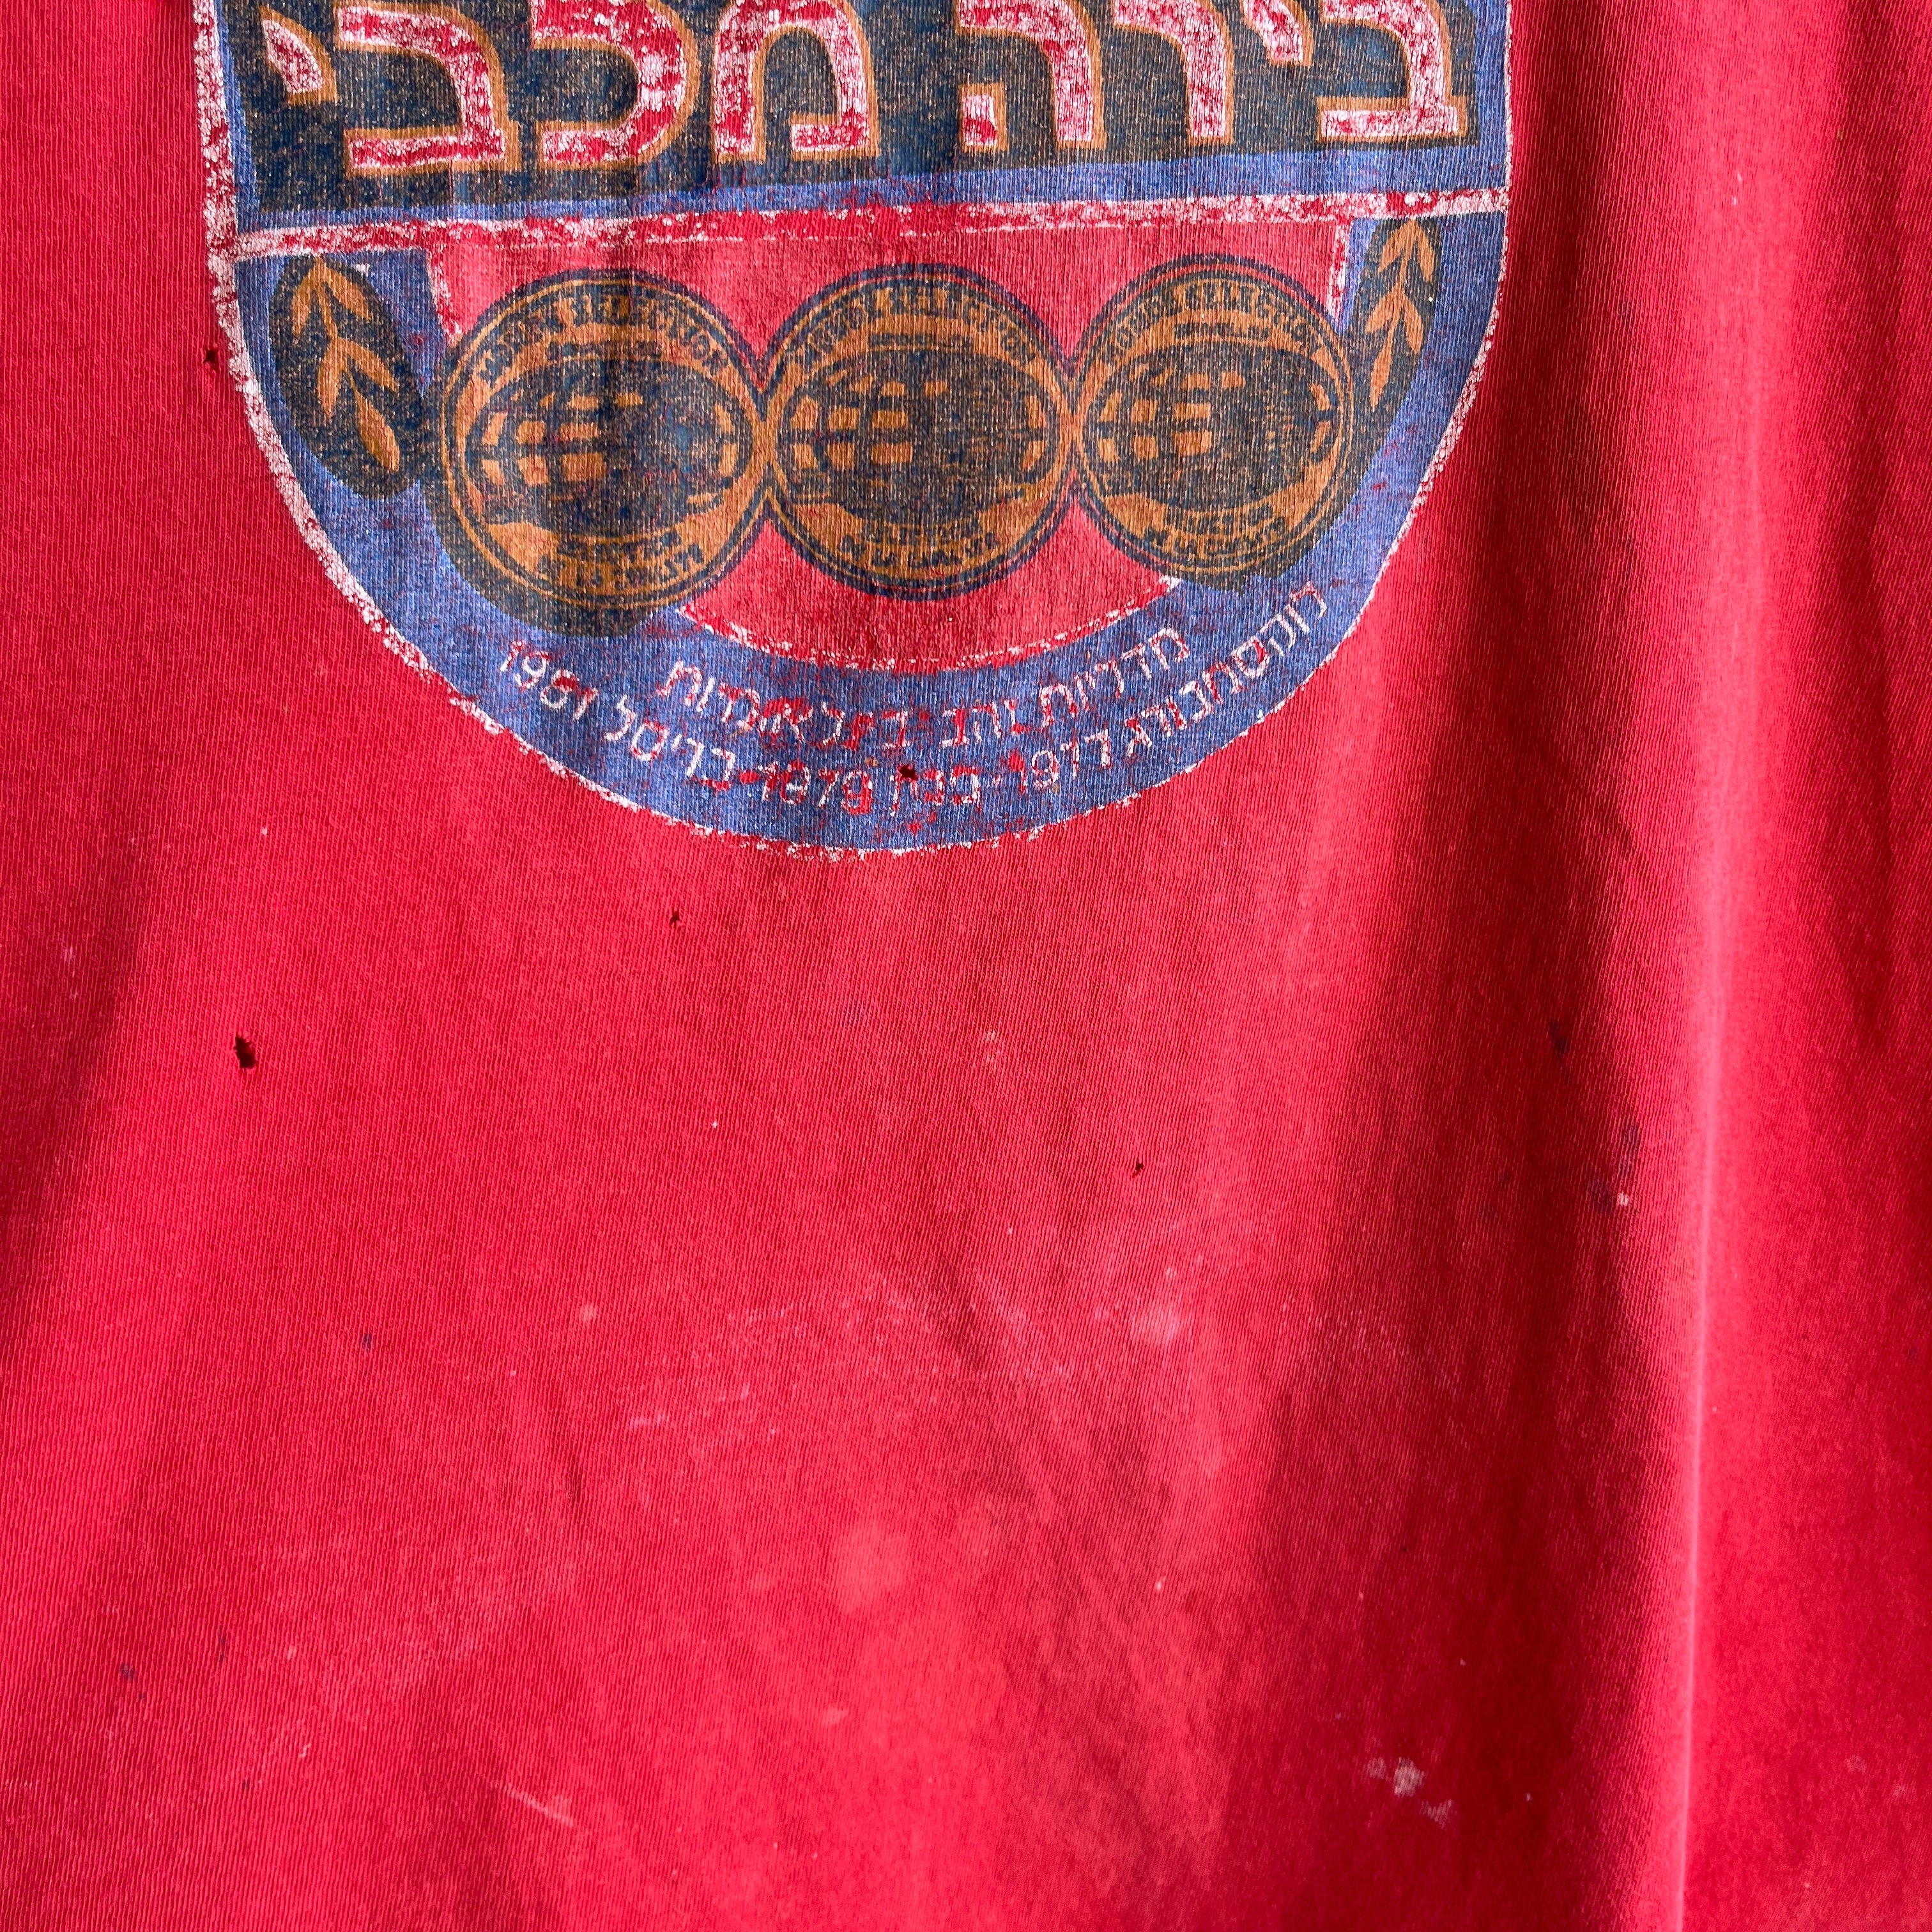 1990s Maccabbe Beer Utterly Thrashed and Sun Faded T-Shirt